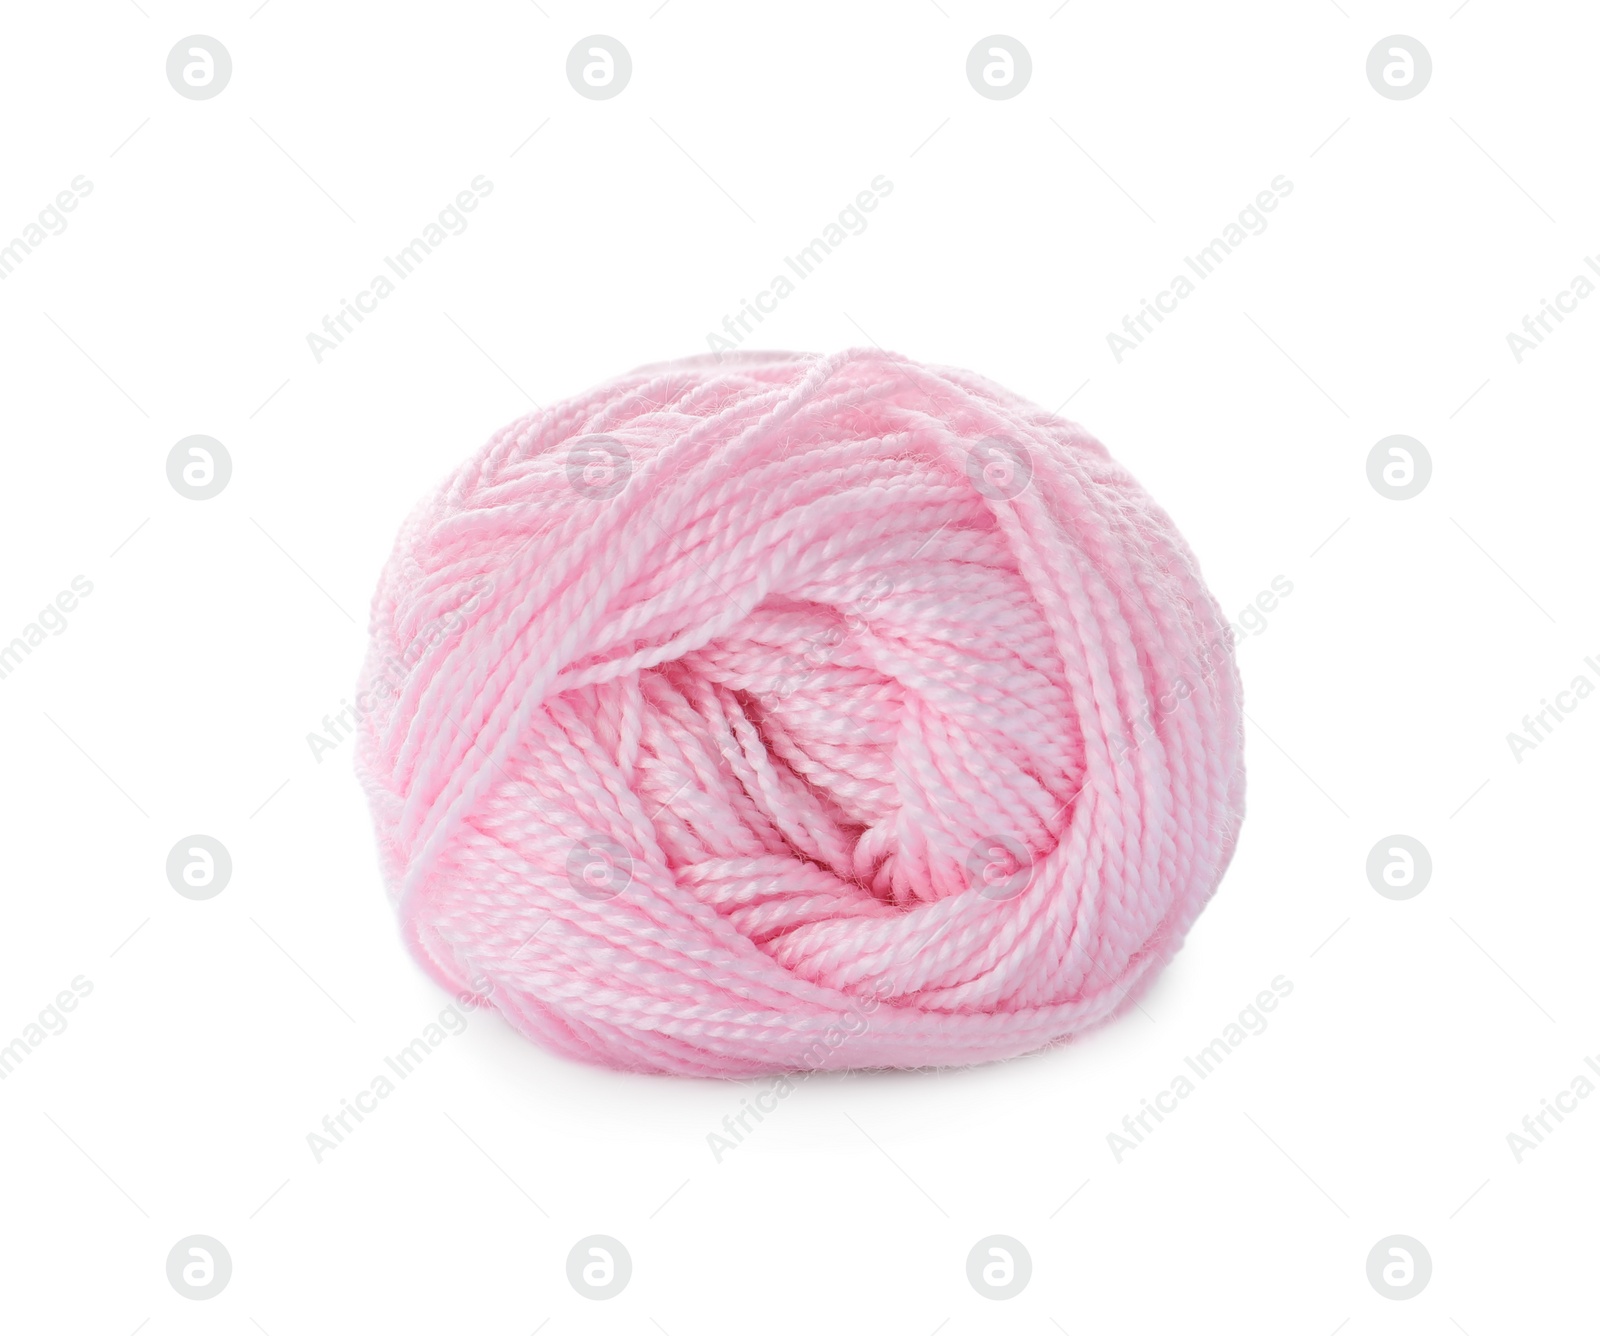 Photo of Soft pink woolen yarn isolated on white